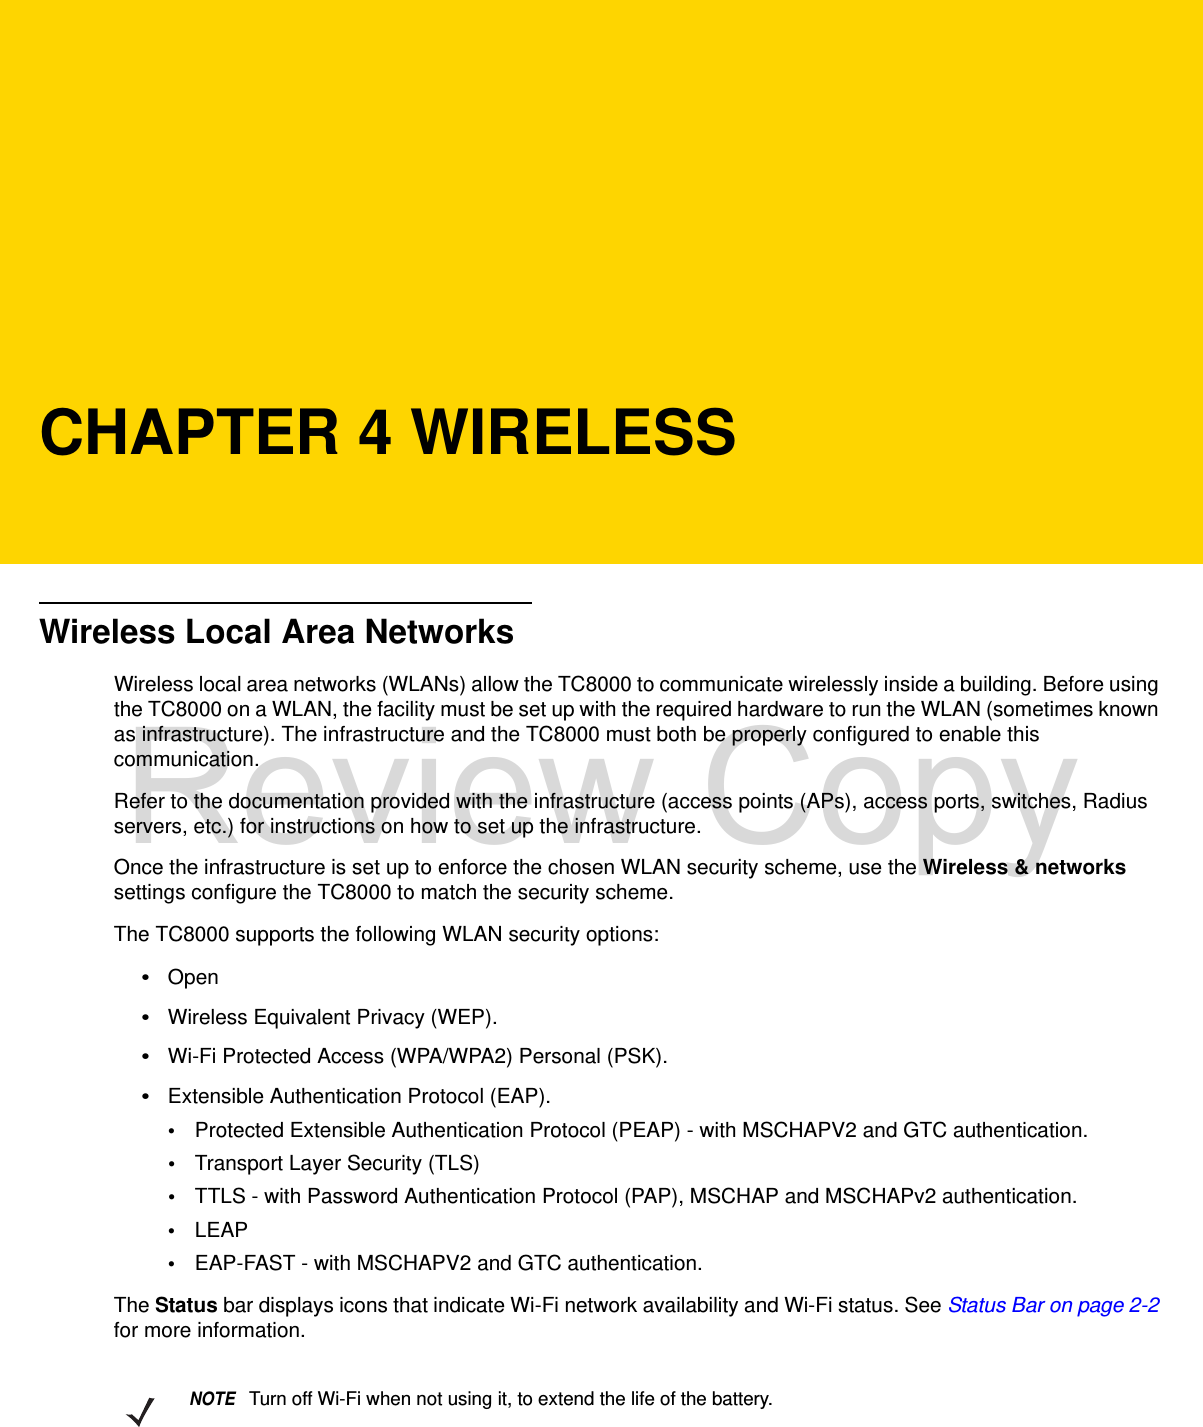 CHAPTER 4 WIRELESSWireless Local Area NetworksWireless local area networks (WLANs) allow the TC8000 to communicate wirelessly inside a building. Before using the TC8000 on a WLAN, the facility must be set up with the required hardware to run the WLAN (sometimes known as infrastructure). The infrastructure and the TC8000 must both be properly configured to enable this communication.Refer to the documentation provided with the infrastructure (access points (APs), access ports, switches, Radius servers, etc.) for instructions on how to set up the infrastructure.Once the infrastructure is set up to enforce the chosen WLAN security scheme, use the Wireless &amp; networks settings configure the TC8000 to match the security scheme.The TC8000 supports the following WLAN security options:•Open•Wireless Equivalent Privacy (WEP).•Wi-Fi Protected Access (WPA/WPA2) Personal (PSK).•Extensible Authentication Protocol (EAP).•Protected Extensible Authentication Protocol (PEAP) - with MSCHAPV2 and GTC authentication.•Transport Layer Security (TLS)•TTLS - with Password Authentication Protocol (PAP), MSCHAP and MSCHAPv2 authentication.•LEAP•EAP-FAST - with MSCHAPV2 and GTC authentication.The Status bar displays icons that indicate Wi-Fi network availability and Wi-Fi status. See Status Bar on page 2-2 for more information.NOTETurn off Wi-Fi when not using it, to extend the life of the battery.Review Copy